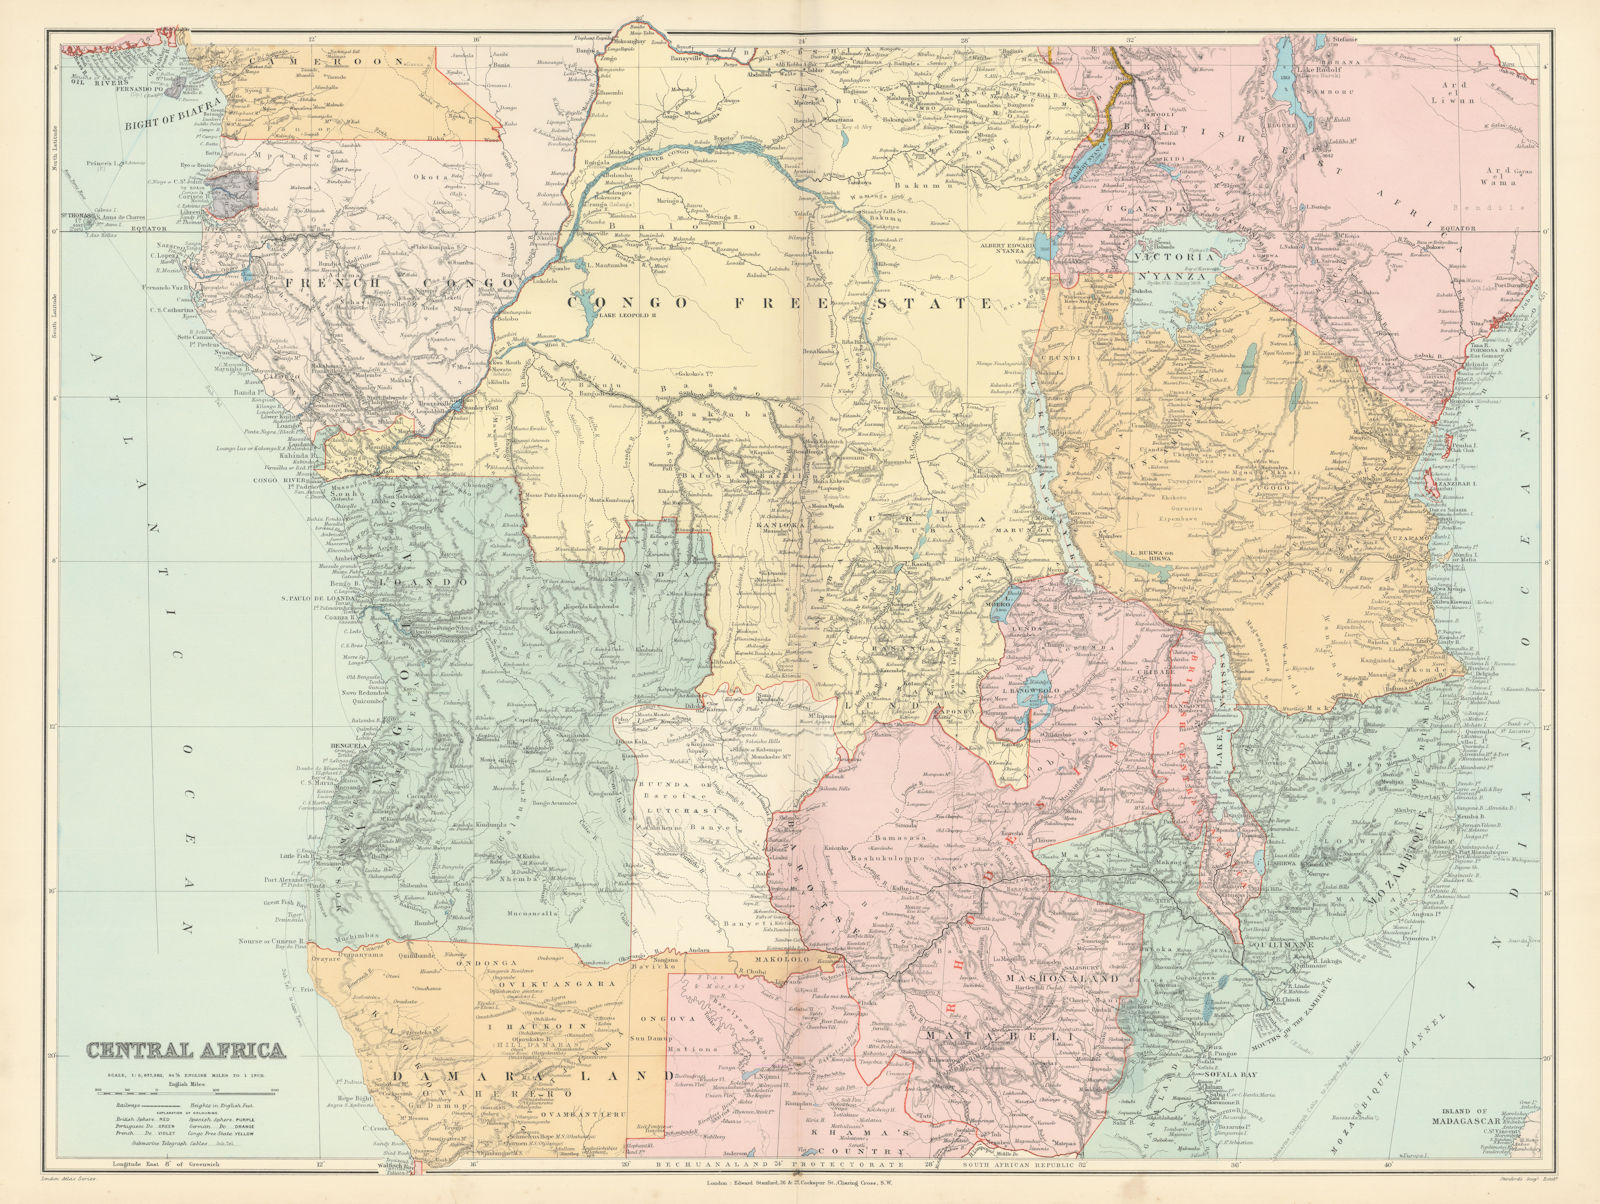 Associate Product Central Africa. Congo Free State Rhodesia German East Africa. STANFORD 1896 map